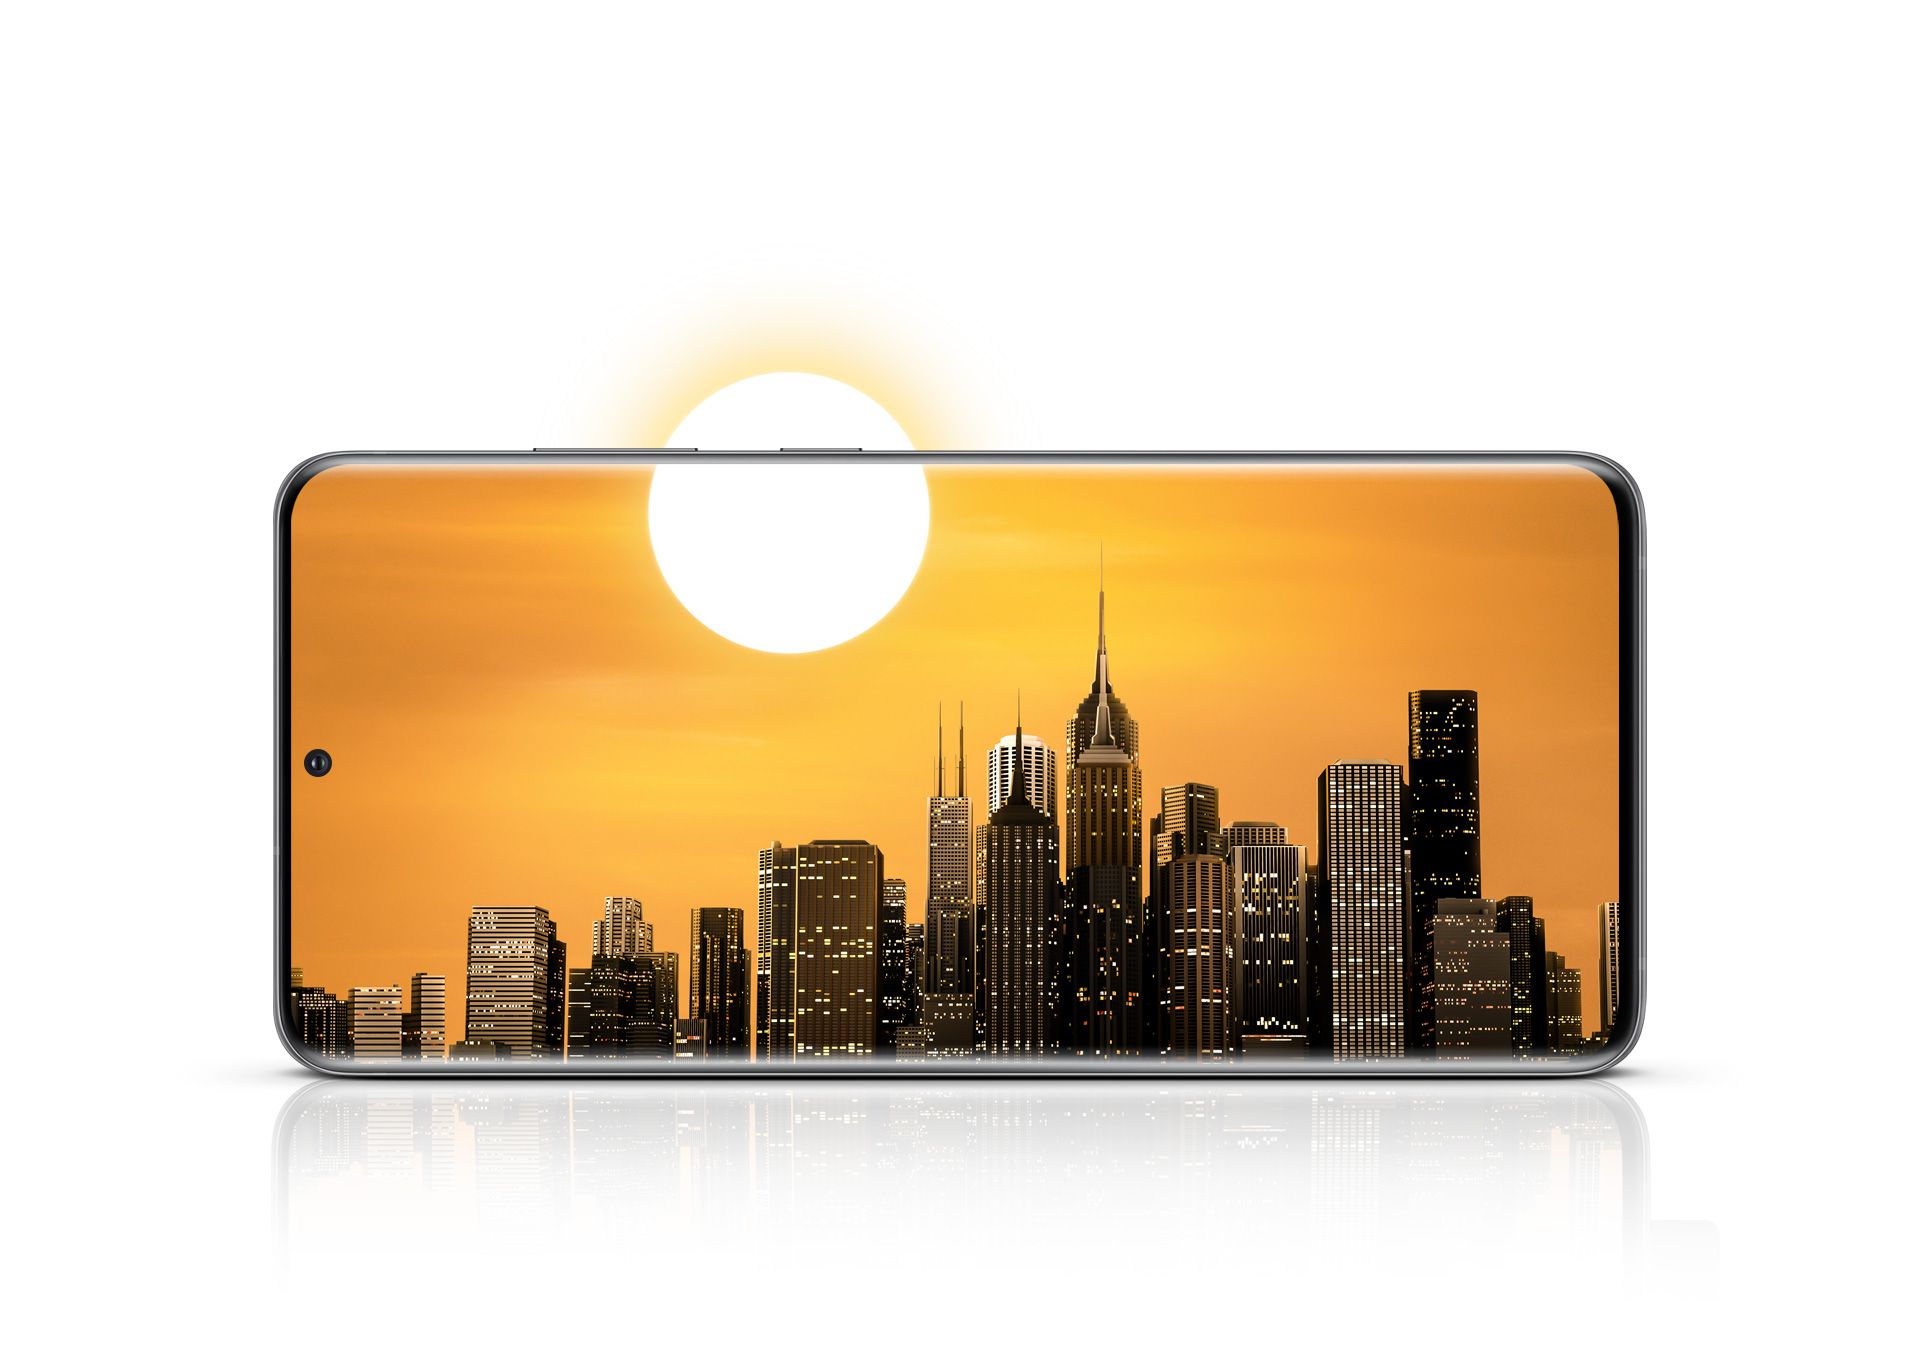 Galaxy S20 Ultra seen from the front in landscape mode with a city skyline onscreen. The sun in the sky is half on the display and half outside the display to show how the all day battery can outlast your day